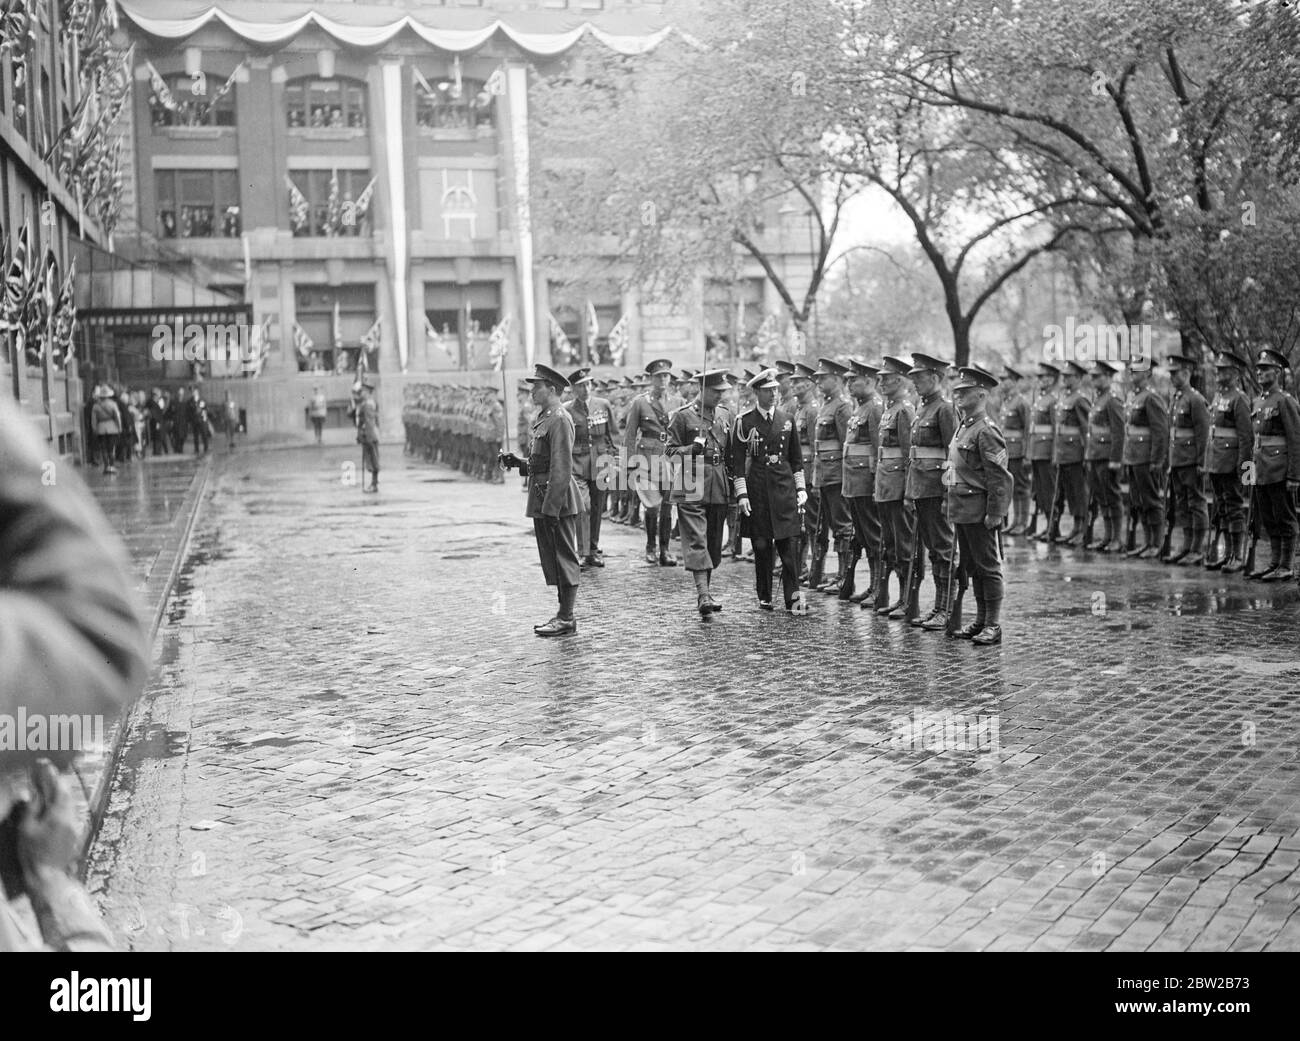 The Royal visit to Canada. King inspects Guard of Honour on arrival at Winnipeg during the Million Dollar Shower [the pressed dubbed the crop saving rain on Wednesday / Million Dollar Rain] 10 May 1939 ? Stock Photo